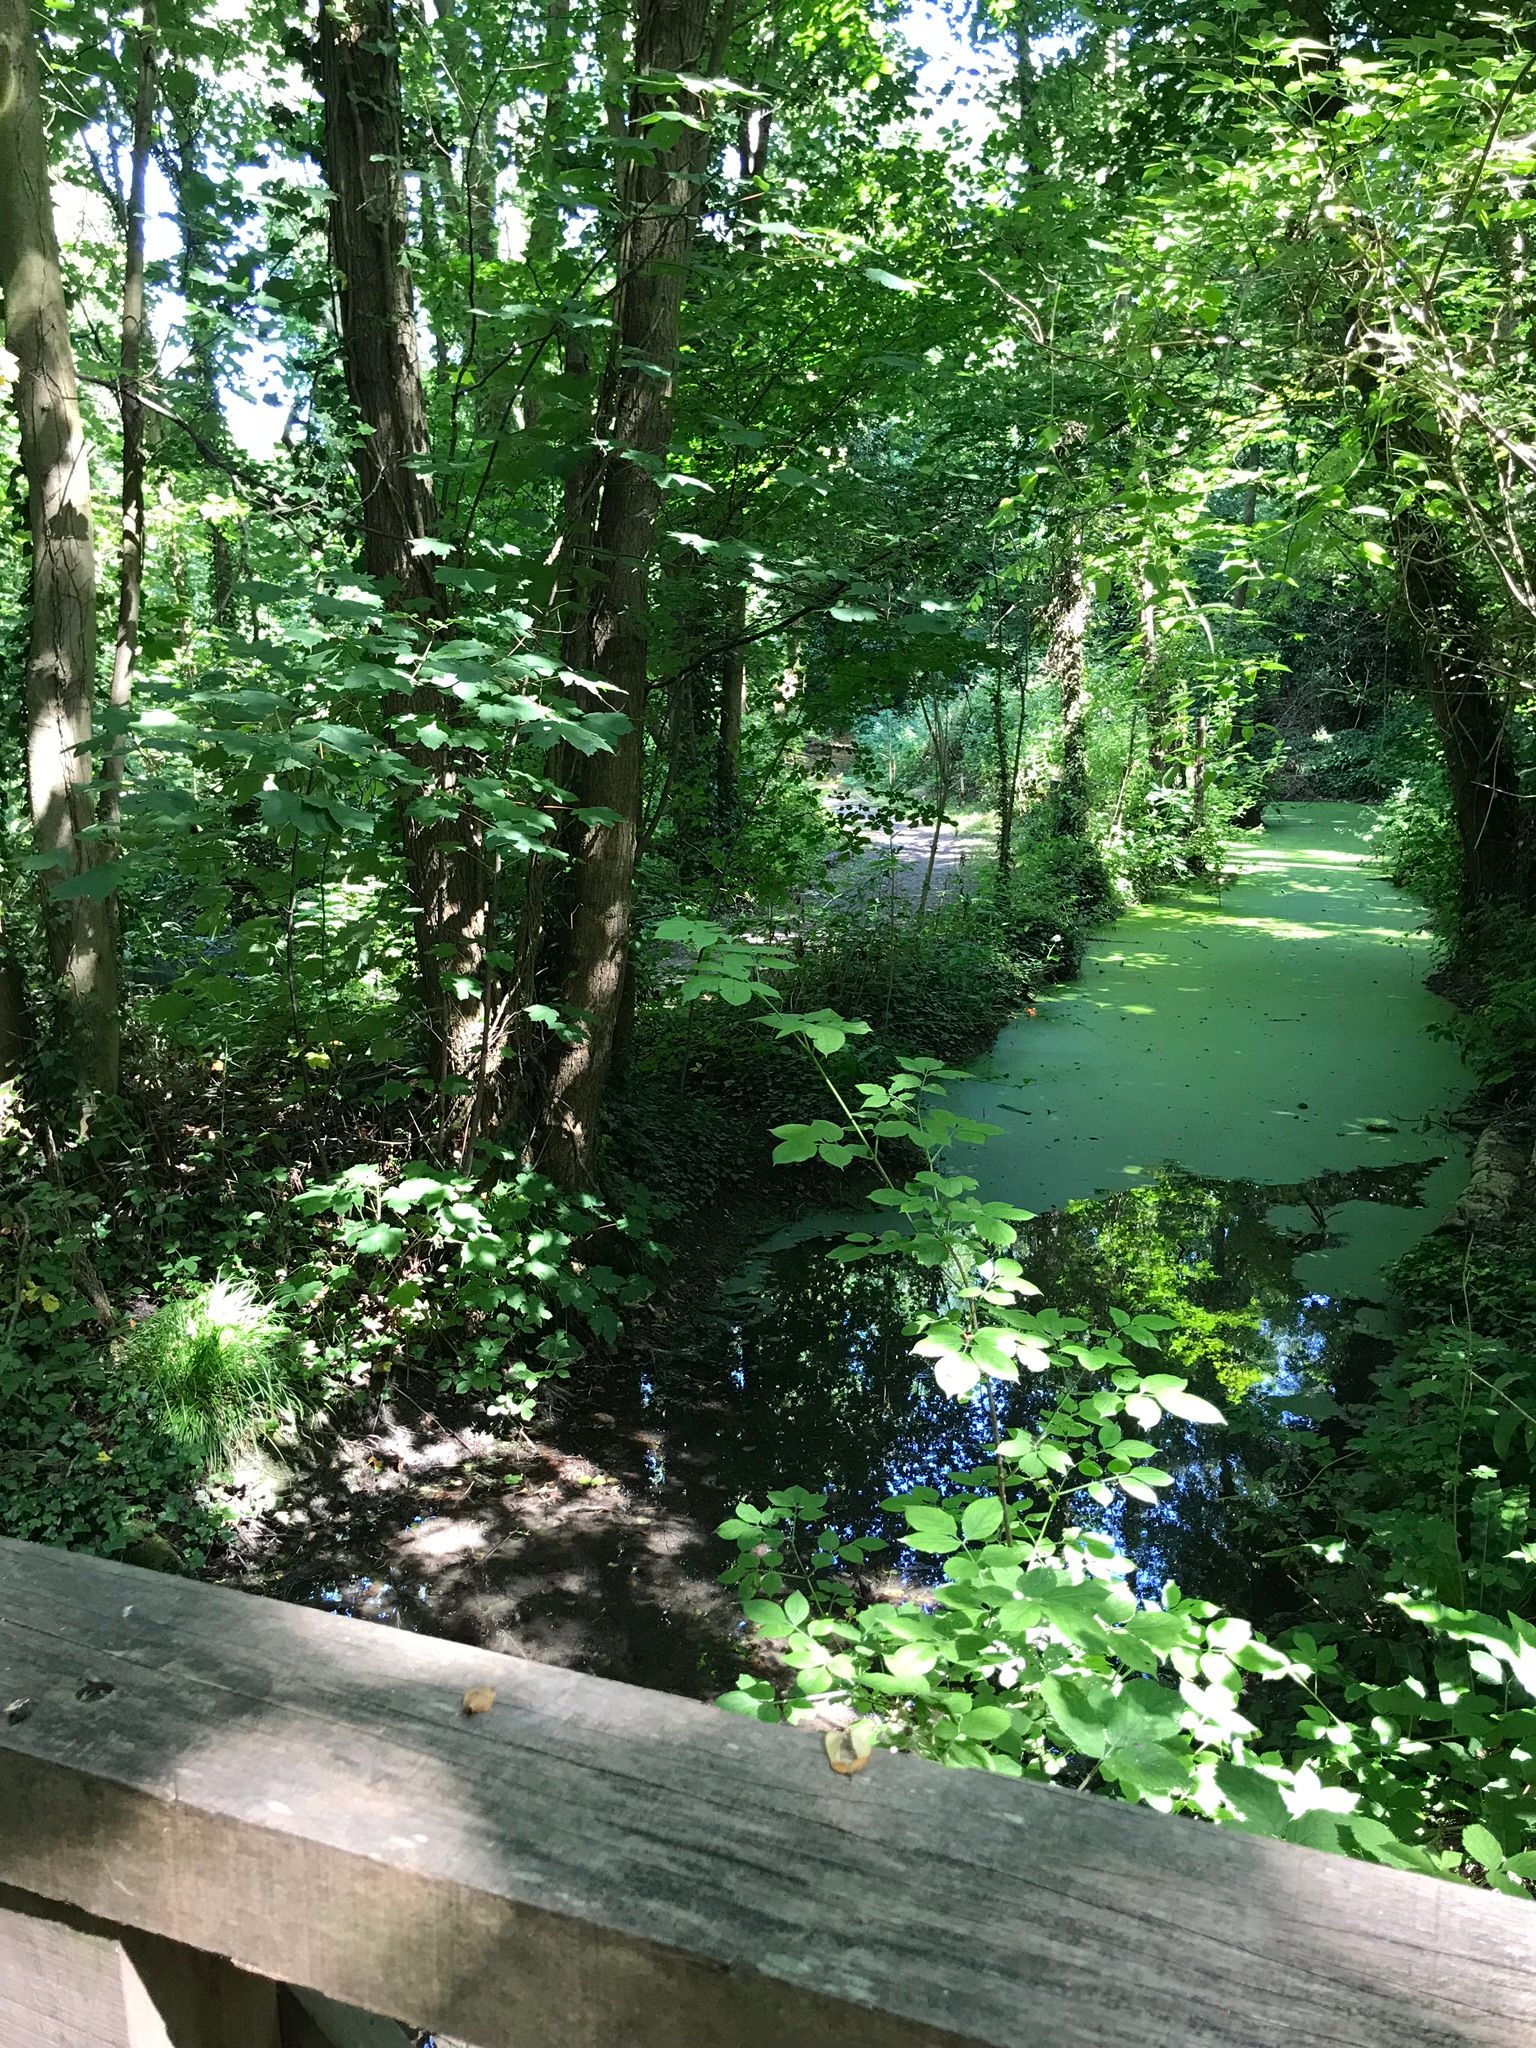 One of the waterways used at OArre Gunpowder works to move the gunpowder components around the site